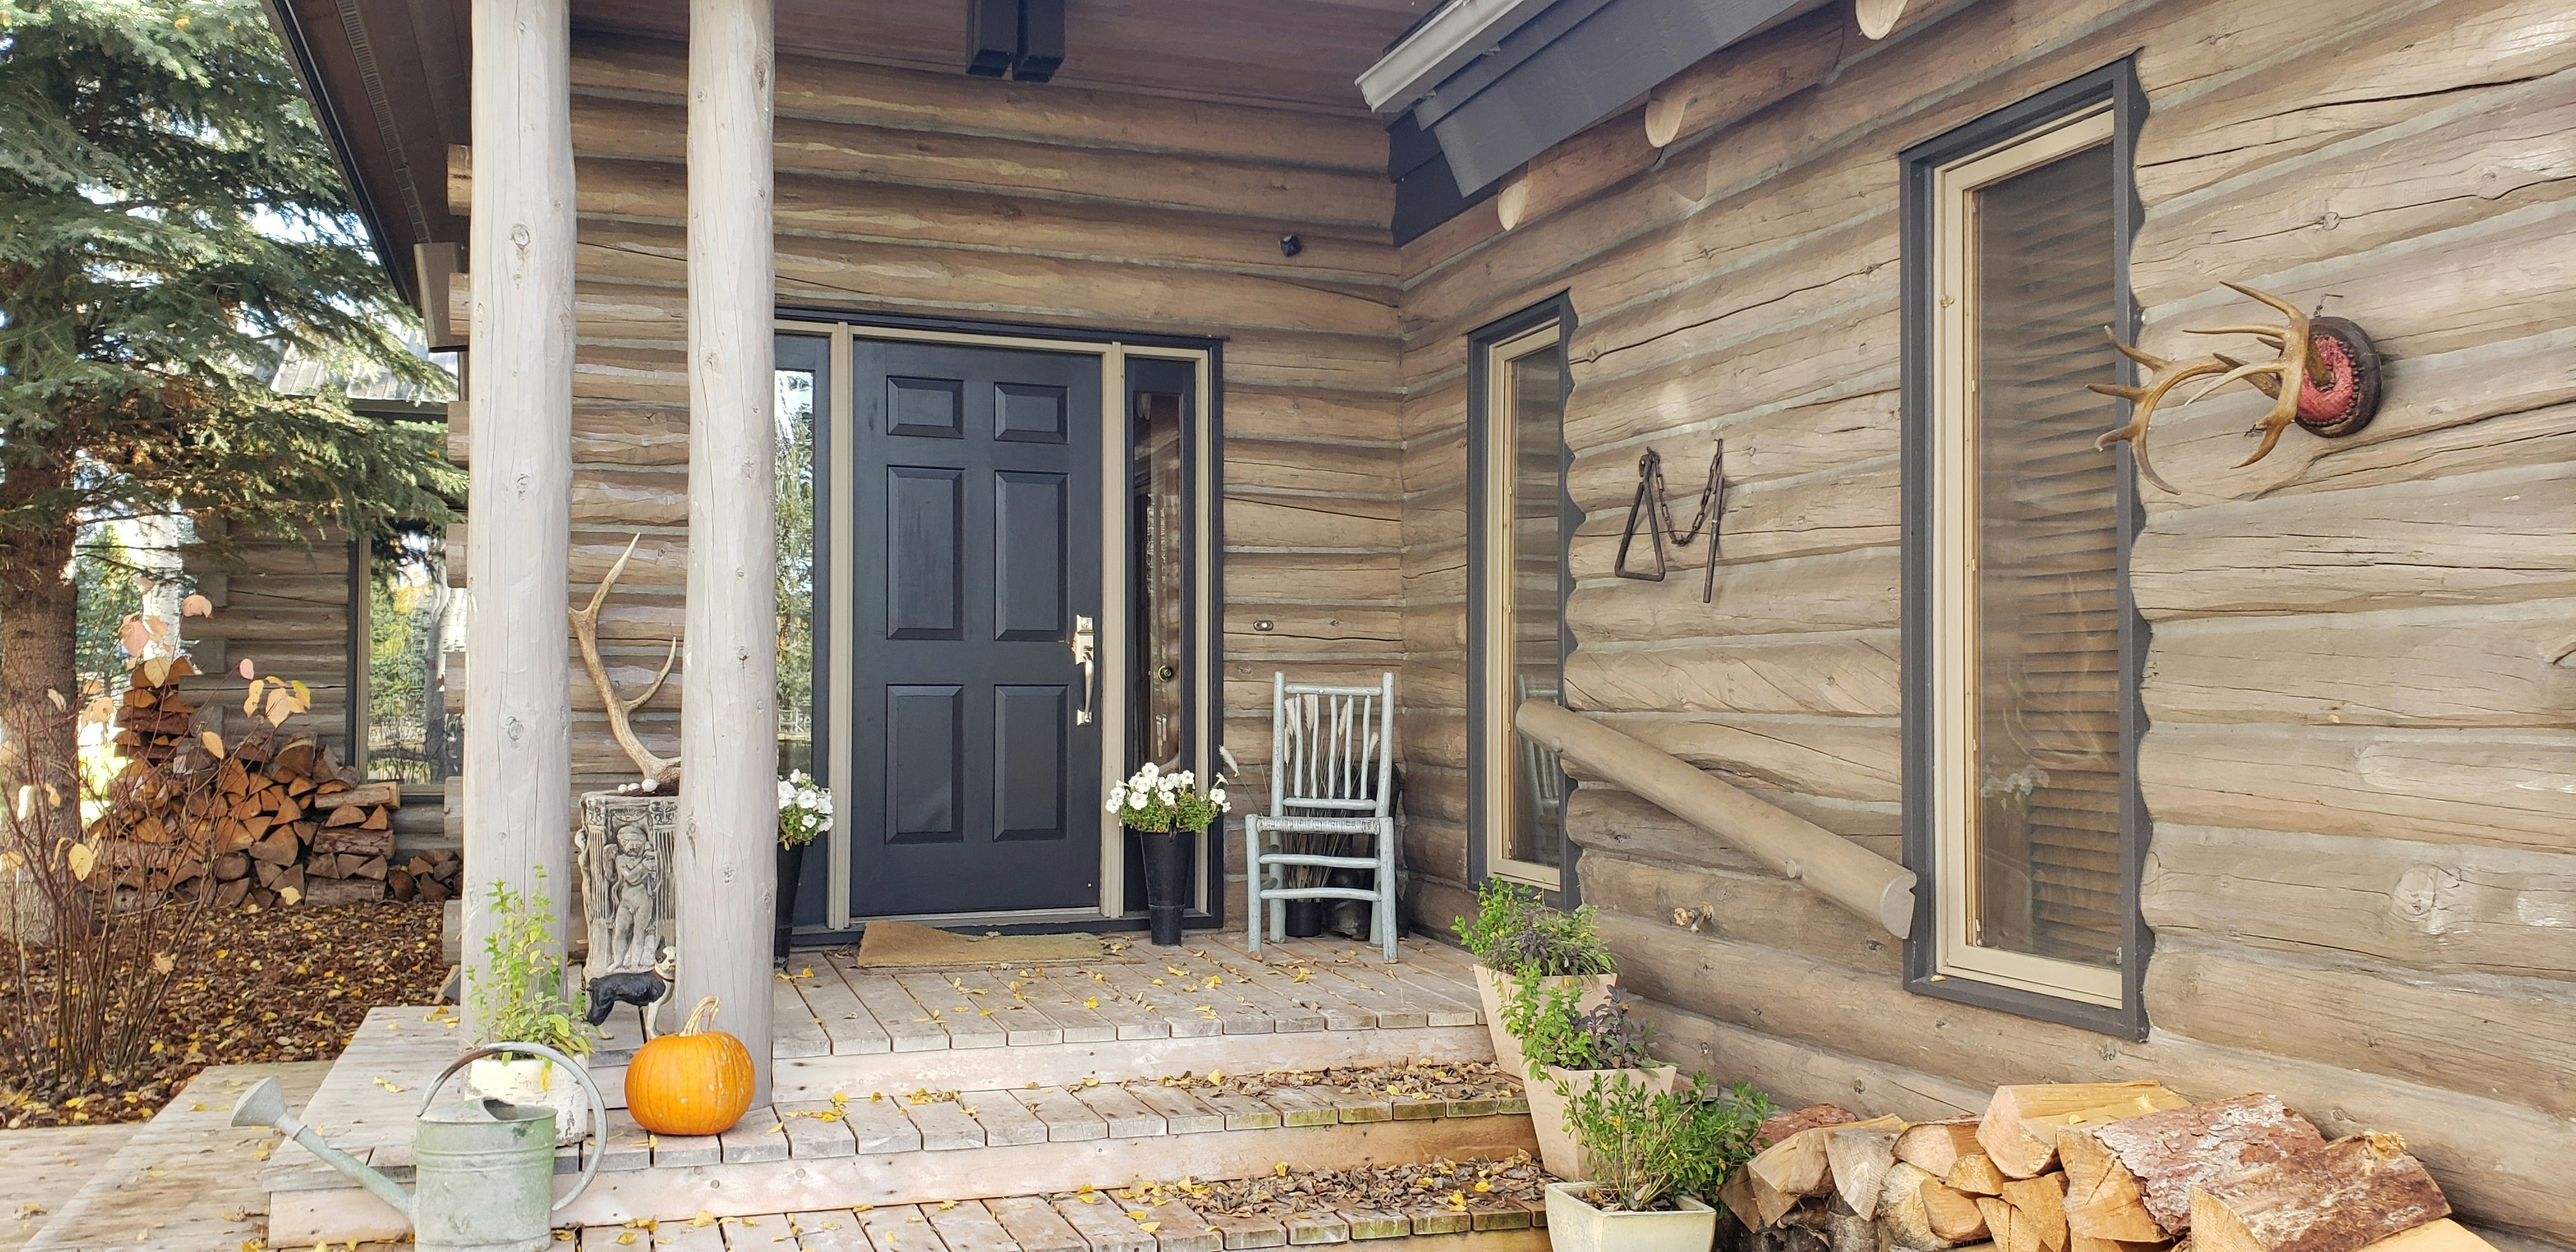 You'll make a grand entrance at the Western Star Ranch cabin.